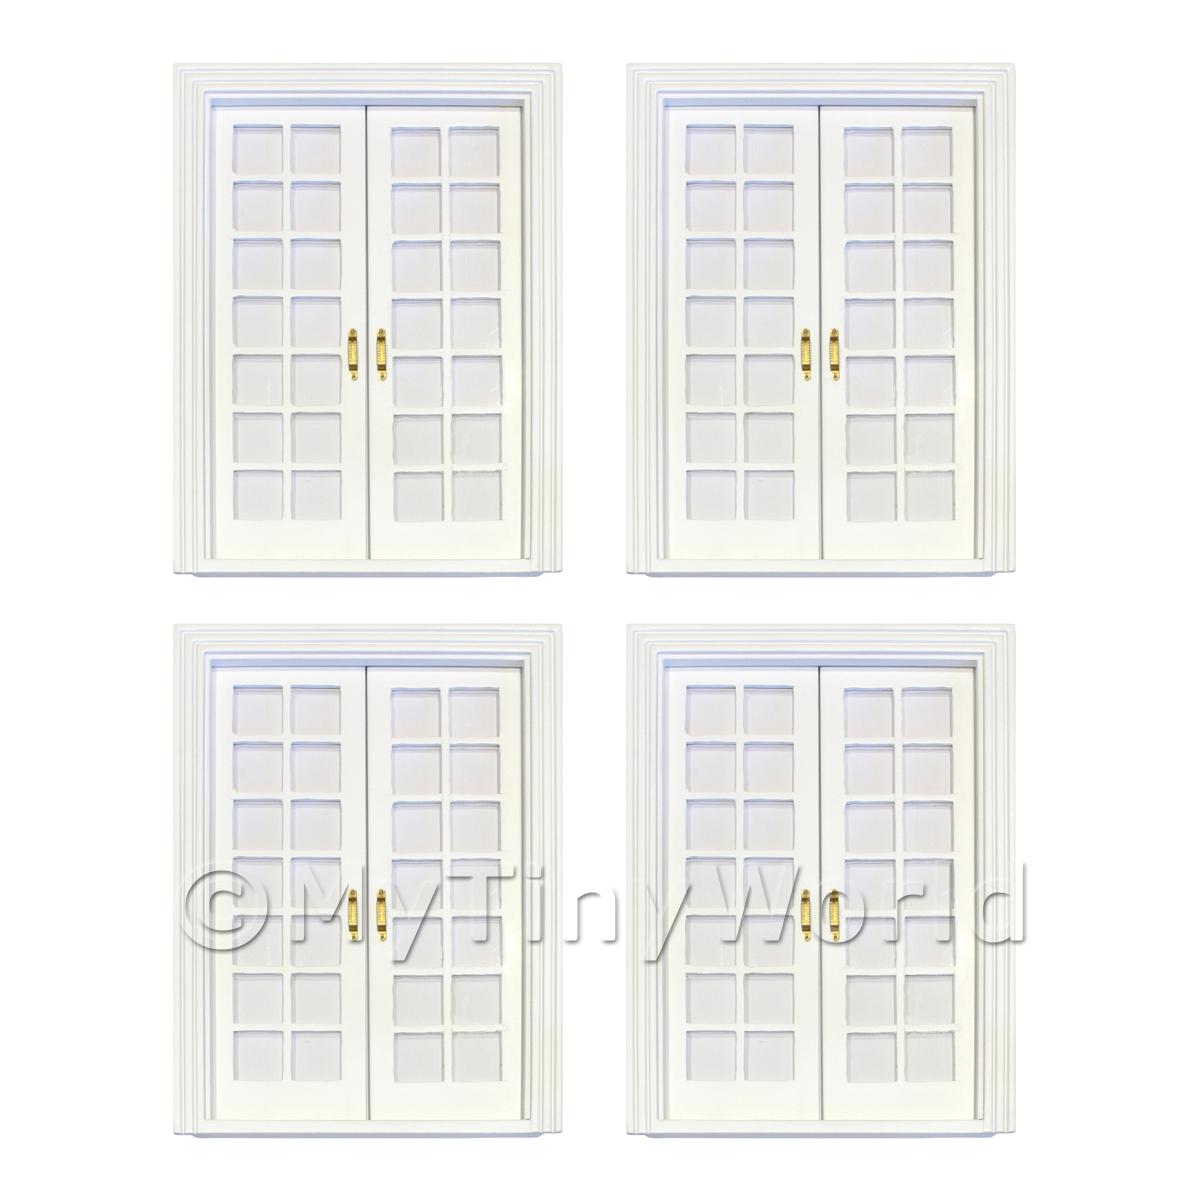 1/12 Scale Dolls House Miniatures  | 4 x Dolls House White Painted Double Internal 14 Pane Glazed Doors